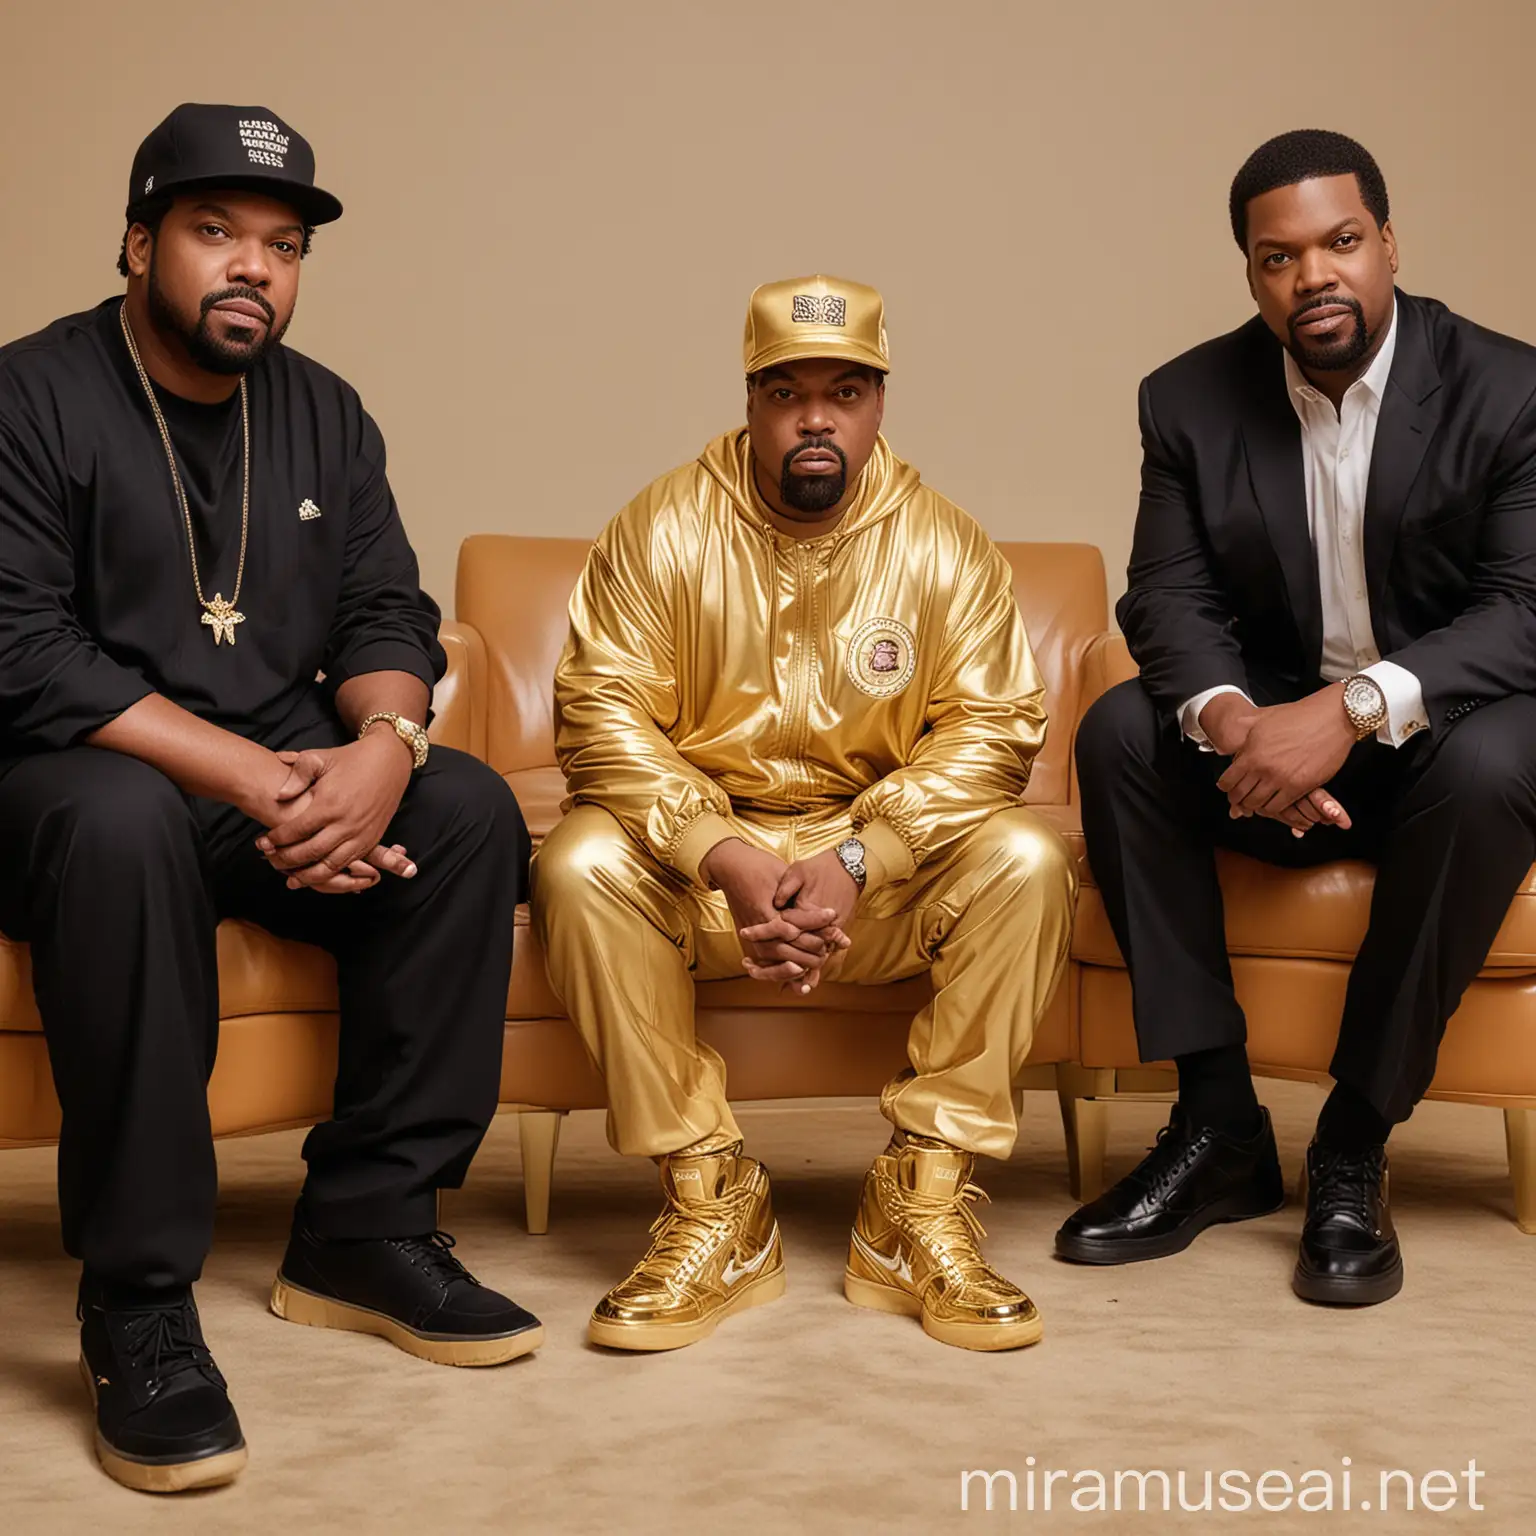 Donald Trump sitting with Ice Cube and Chris Tucker and wearing Donald Trump T golden sneaker